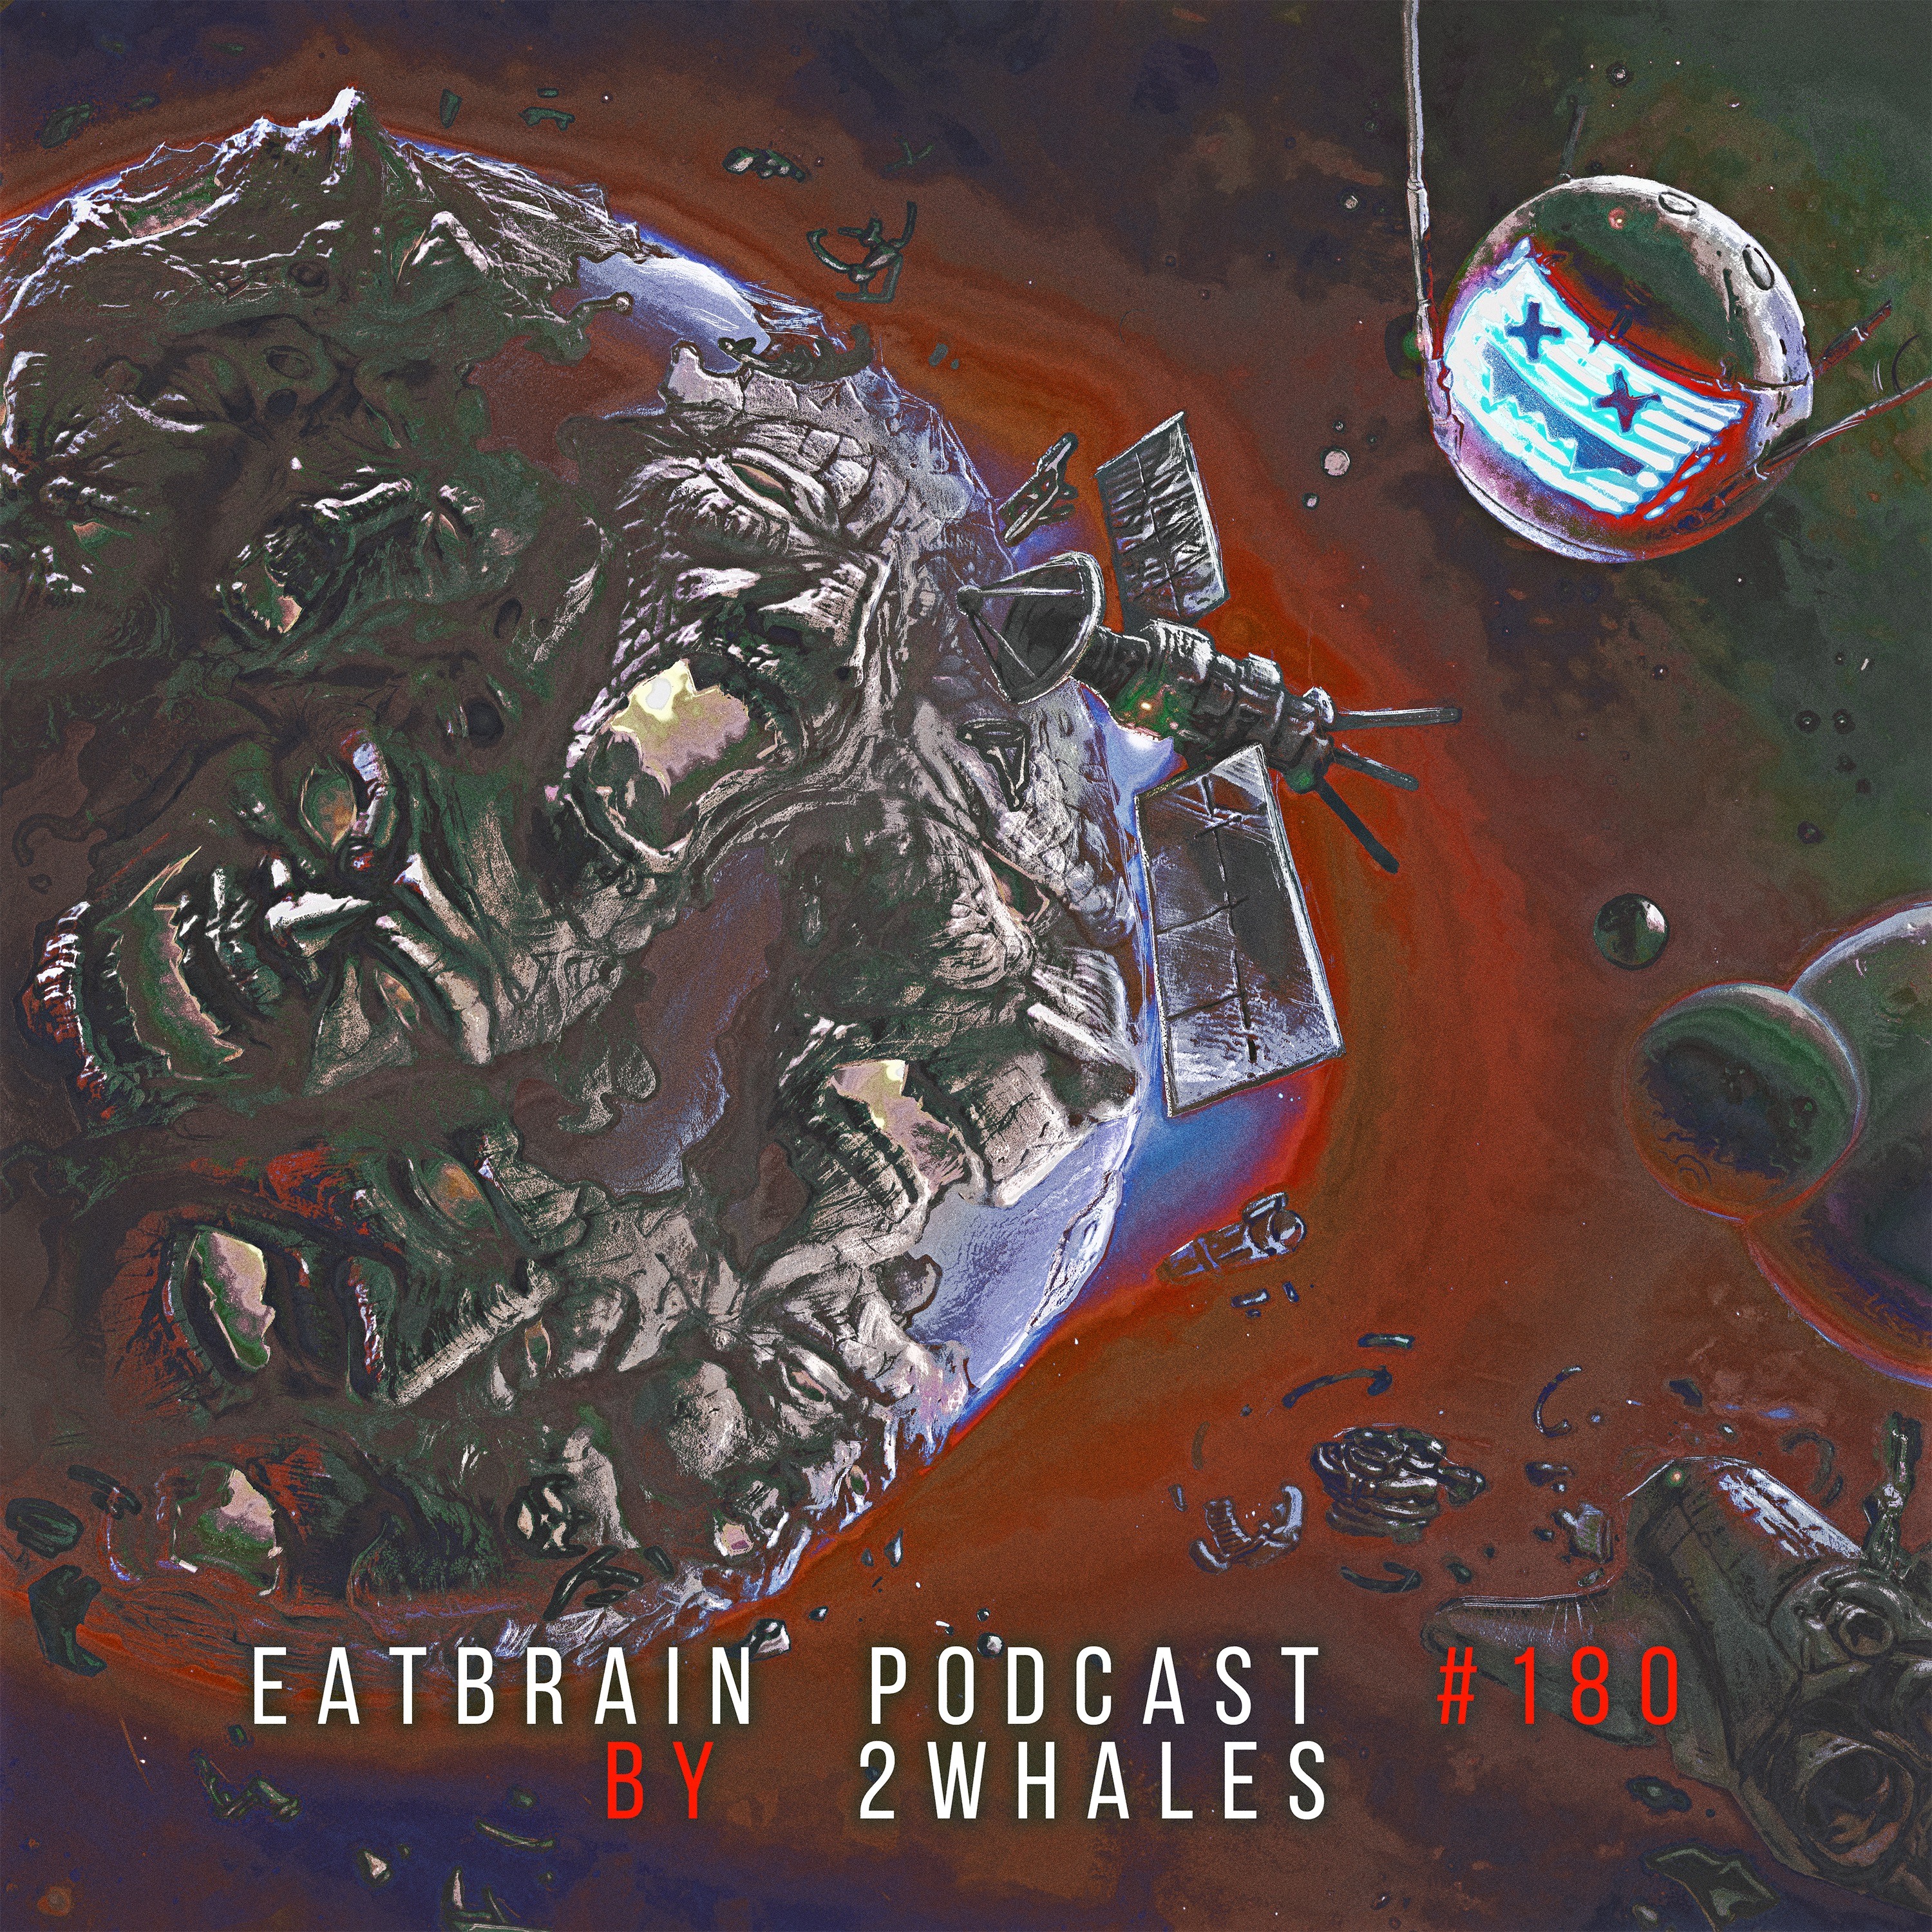 EATBRAIN Podcast 180 by 2Whales